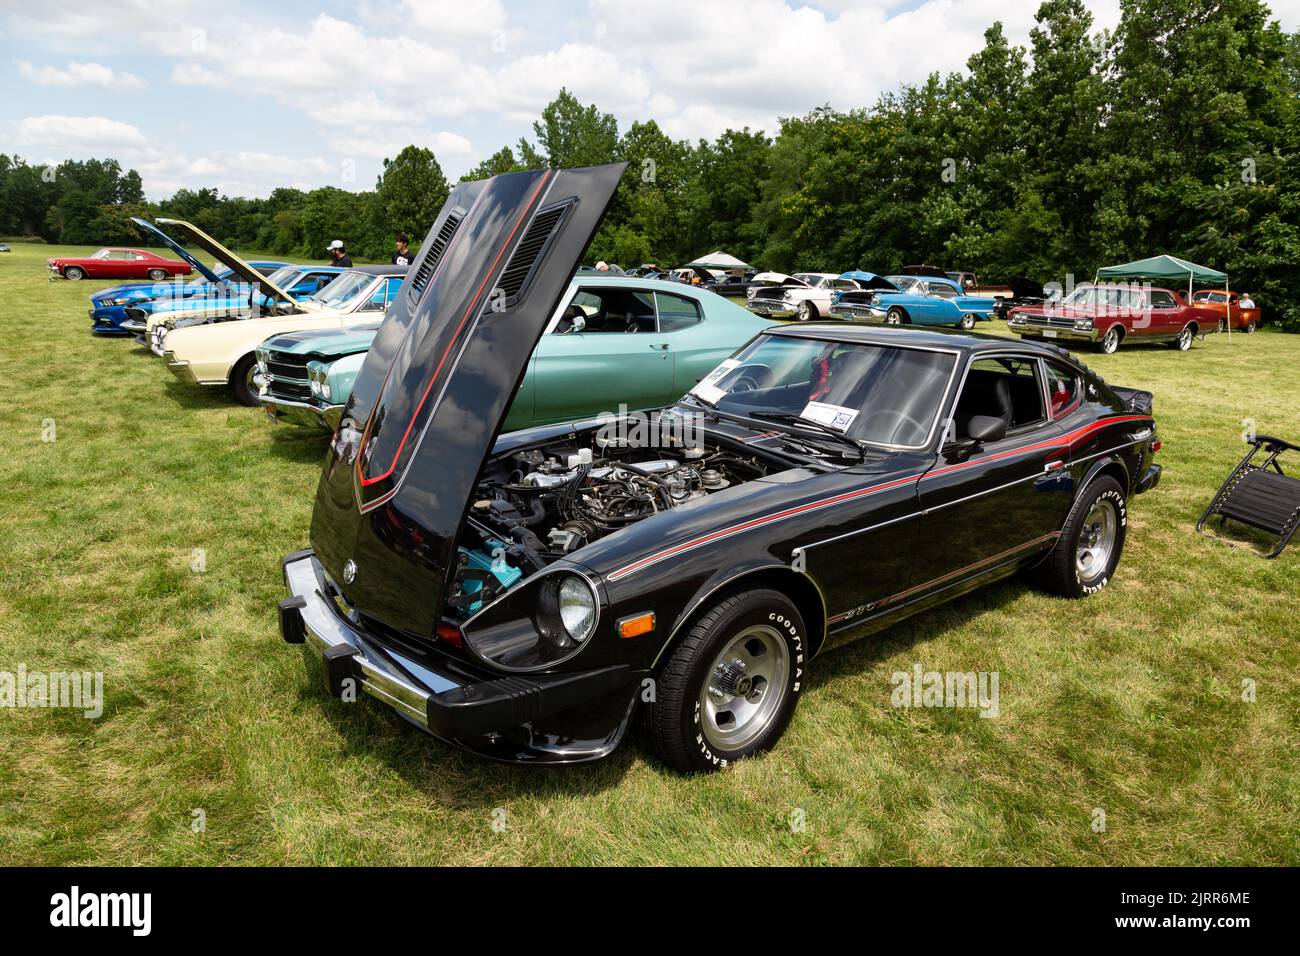 A black Datsun 280Z sports car, also known as the Nissan S30 Fairlady Z, on display at a car show in Fort Wayne, Indiana, USA. Stock Photo